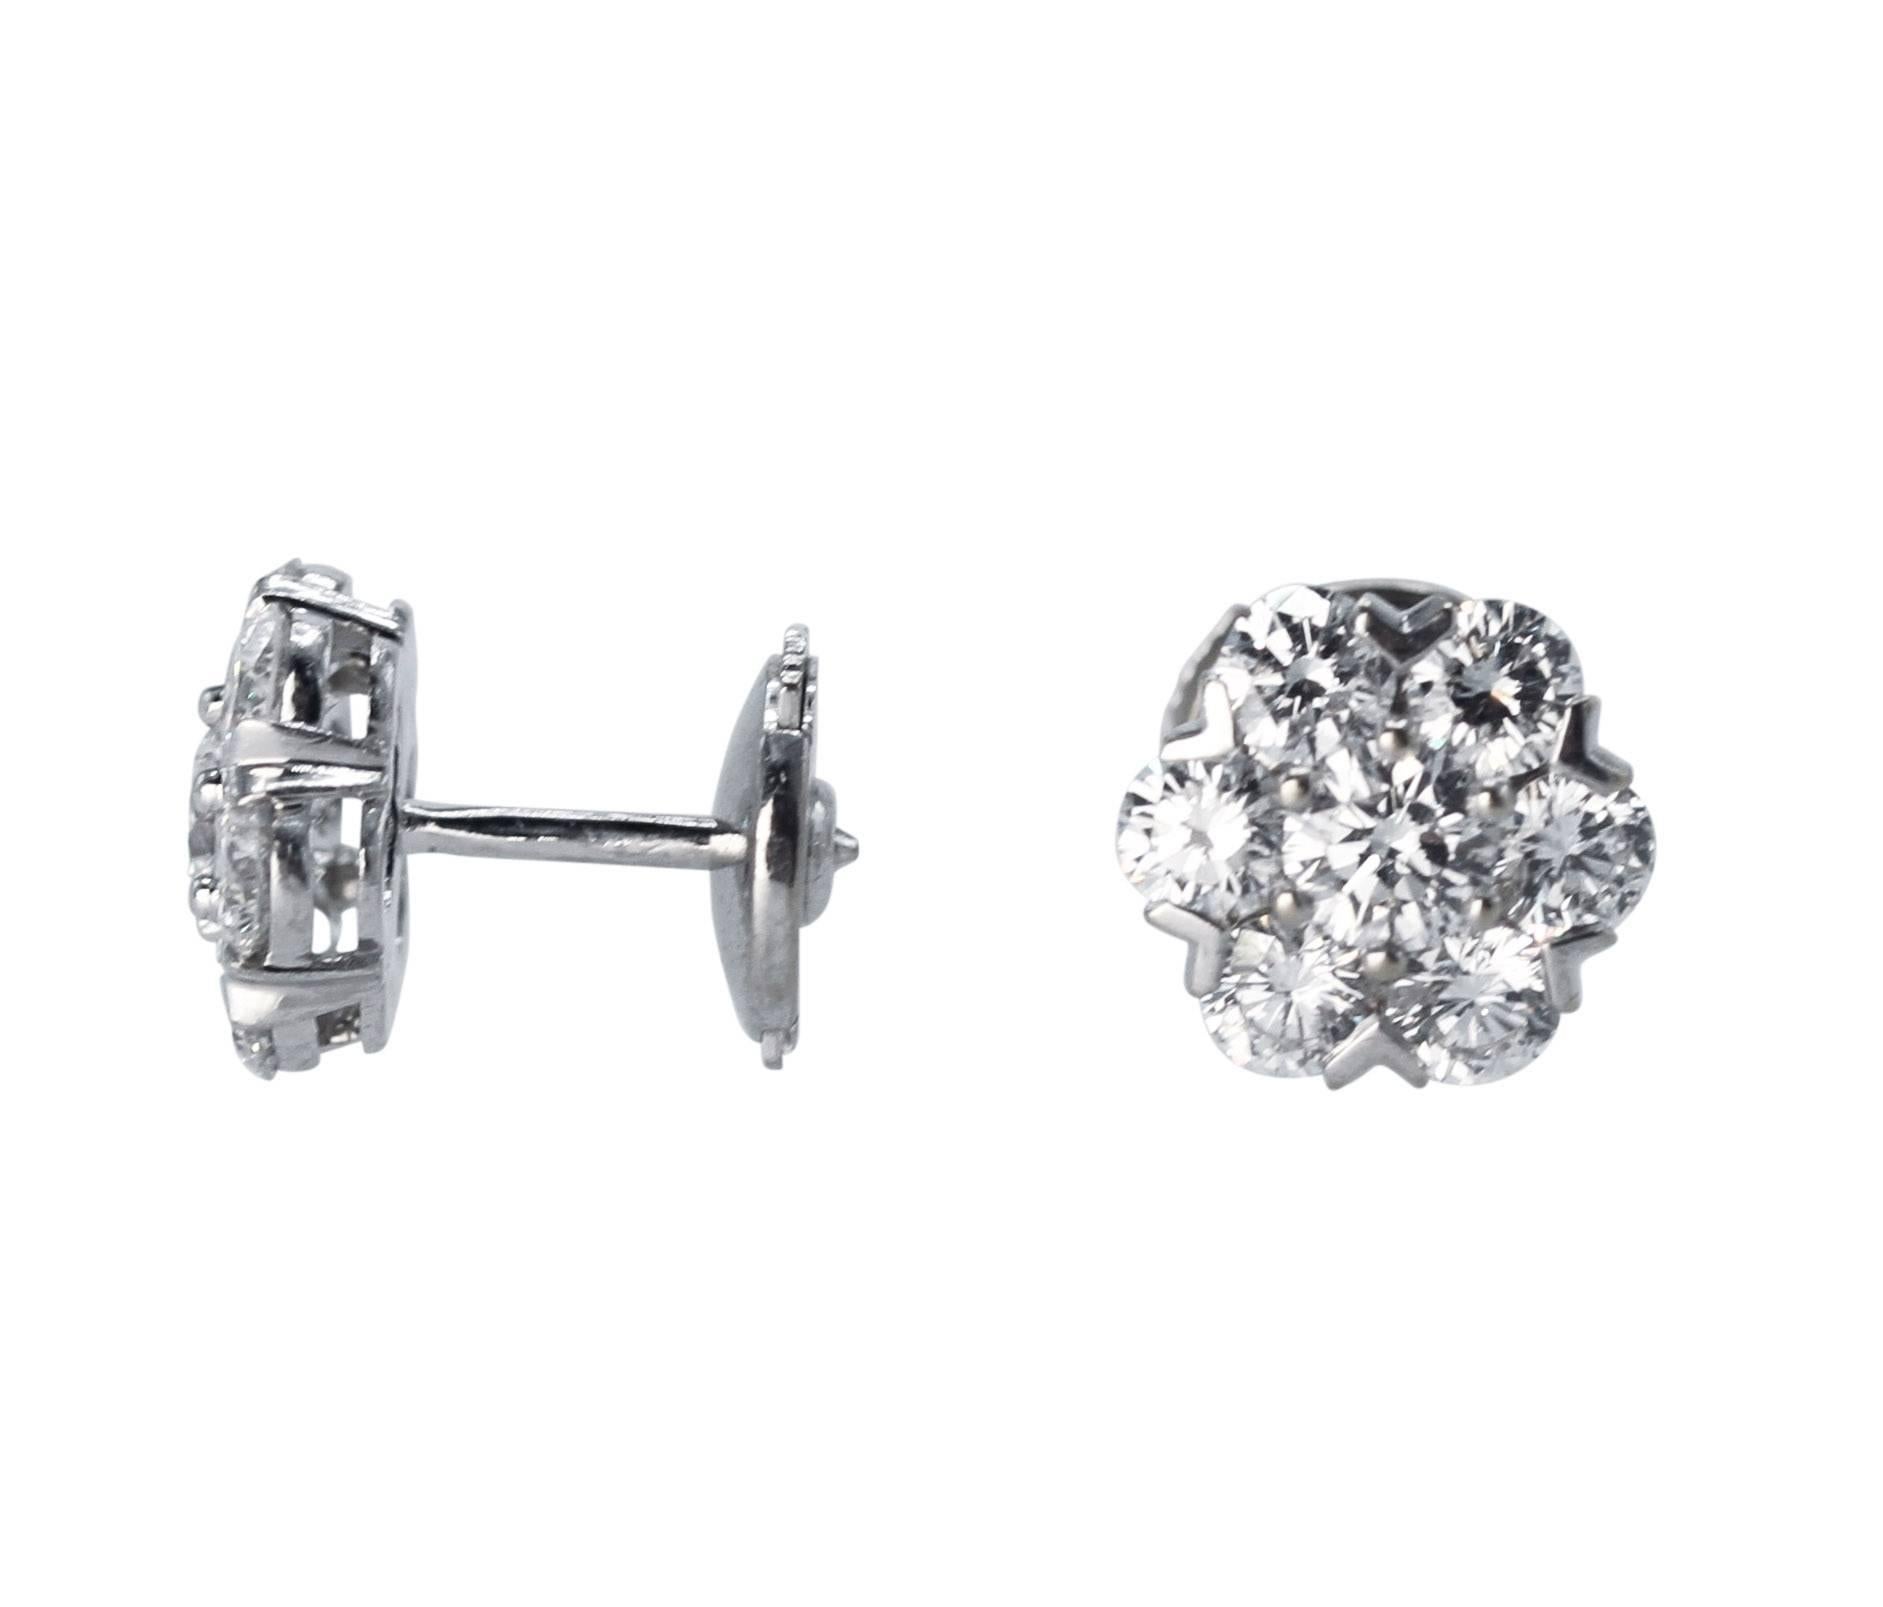 Pair of 18 Karat White Gold and Diamond 'Fleurette' Earrings by Van Cleef & Arpels
• Signed VCA, numbered BL49935, stamped OR and 750 
• 14 round diamonds weighing 1.82 carats
• Gross weight 3.2 grams, measuring 3/8 by 3/8 inch
• Known retail $25,700